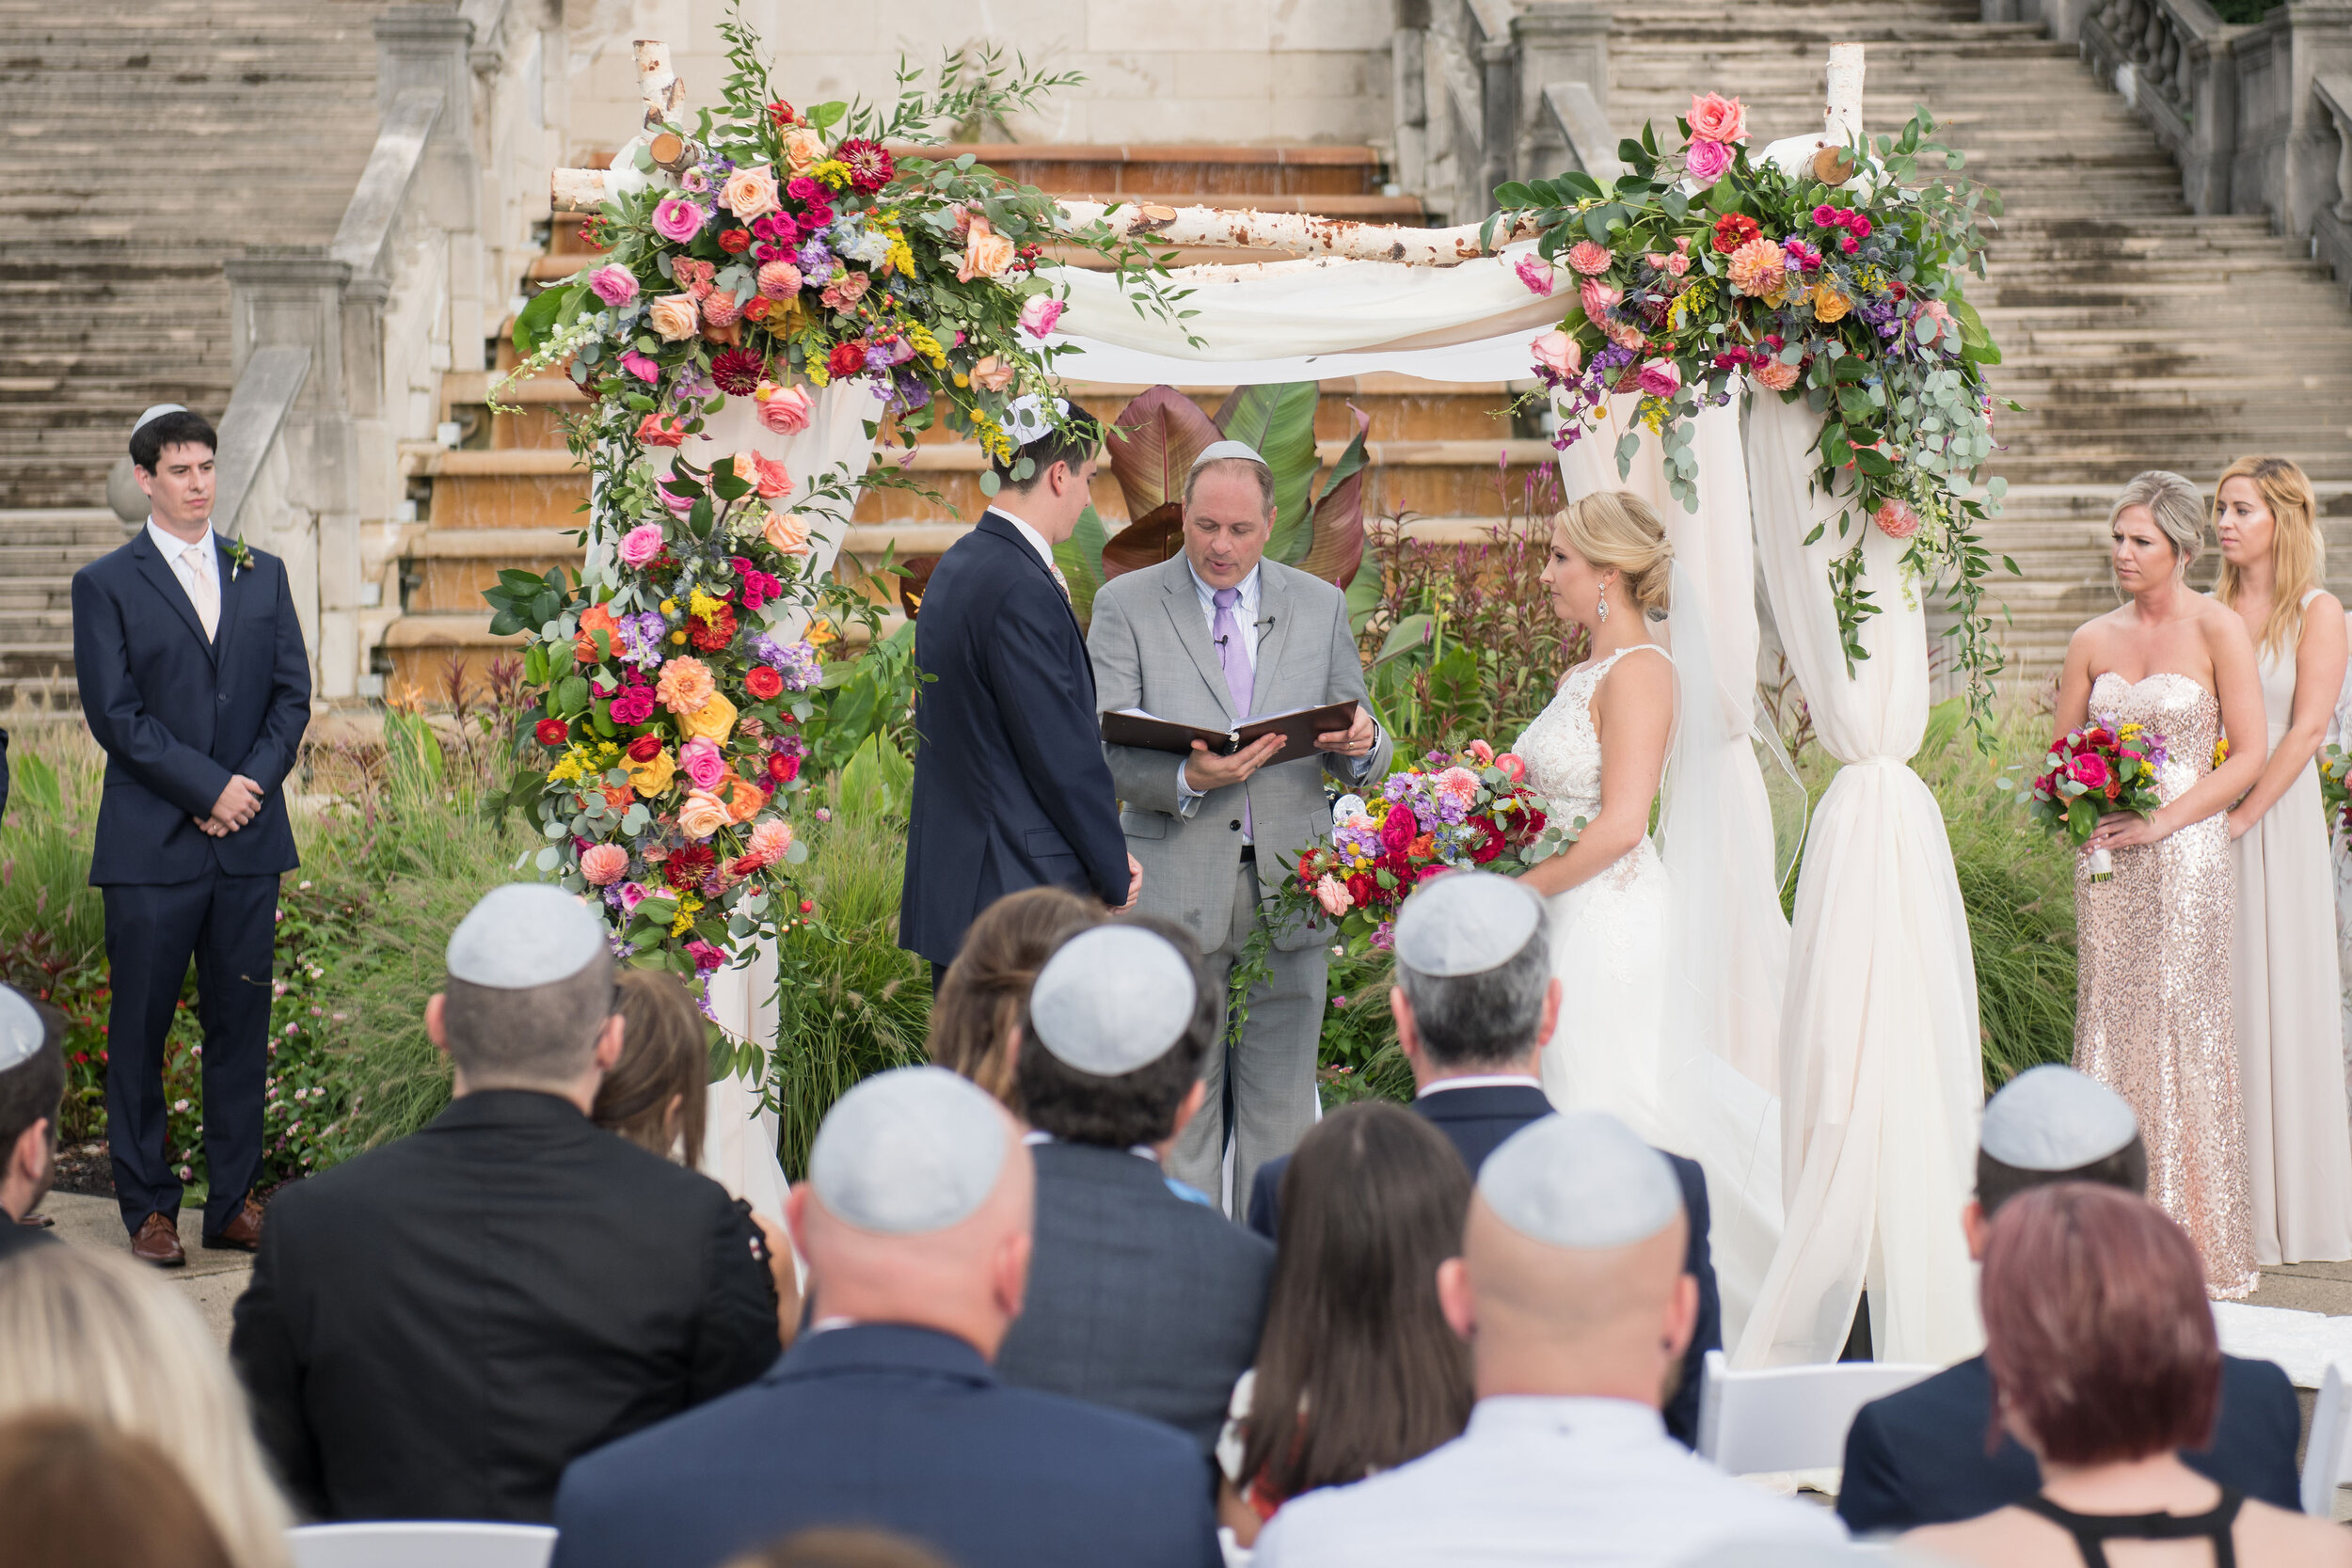 Chuppah with Colorful Florals and White Drapery